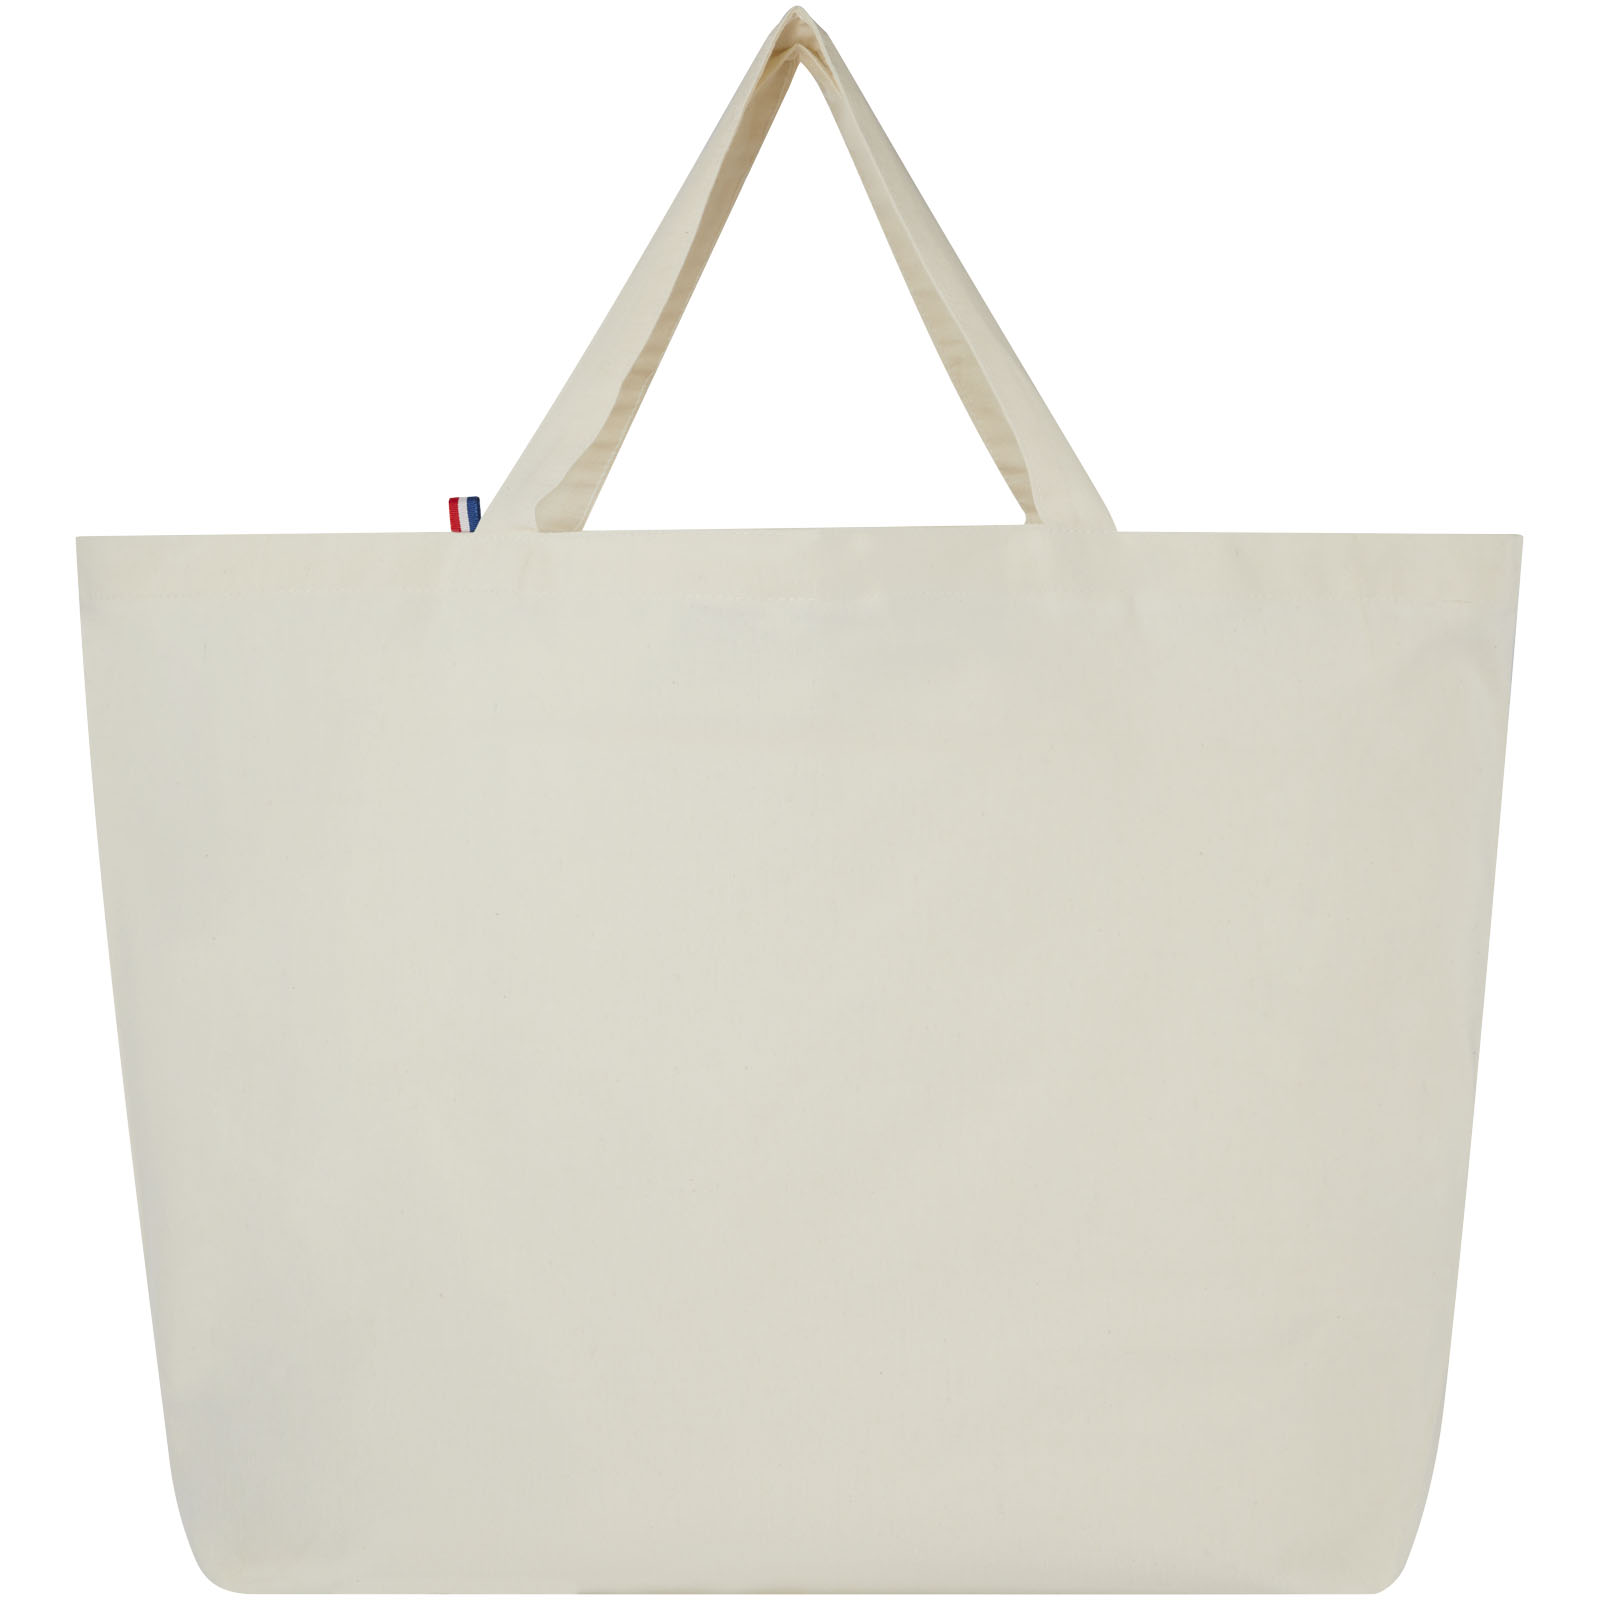 Advertising Shopping & Tote Bags - Cannes 200 g/m2 recycled shopper tote bag 10L - 2